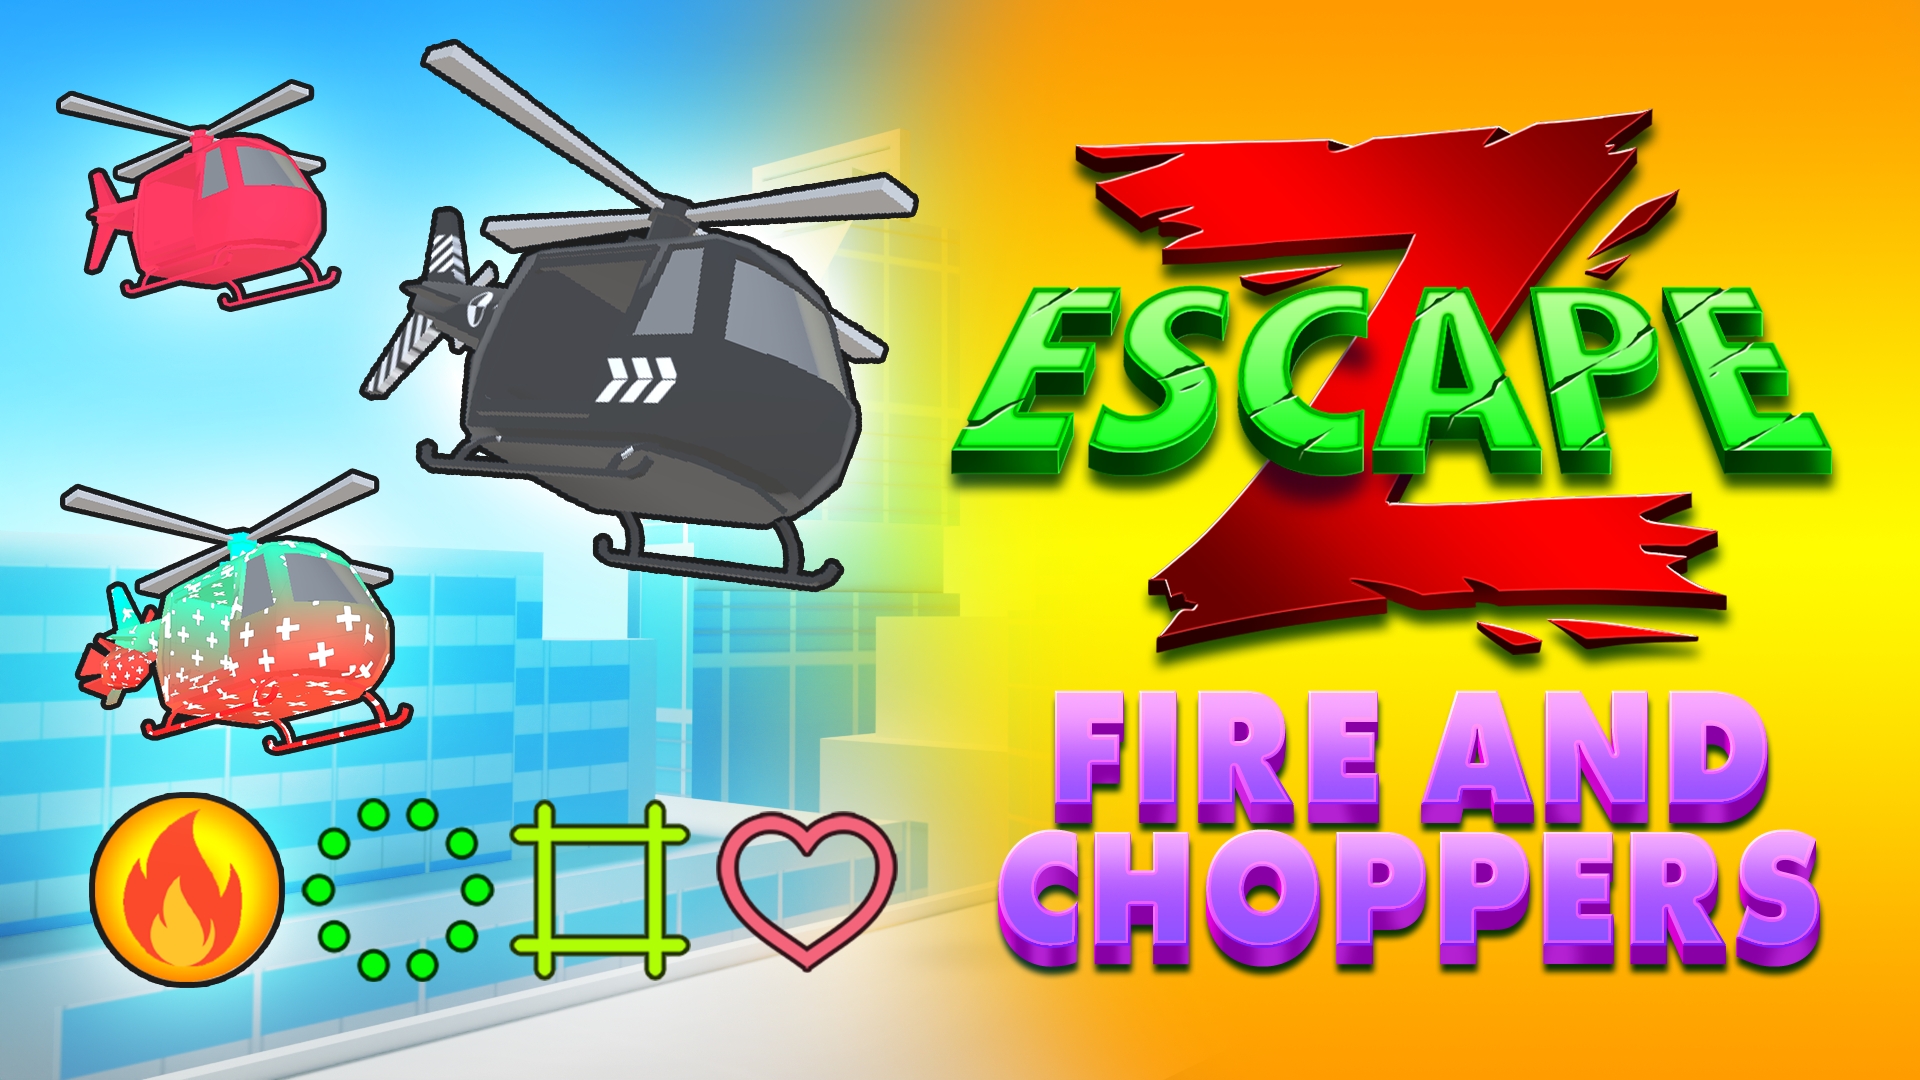 Z Escape: Fire and Choppers